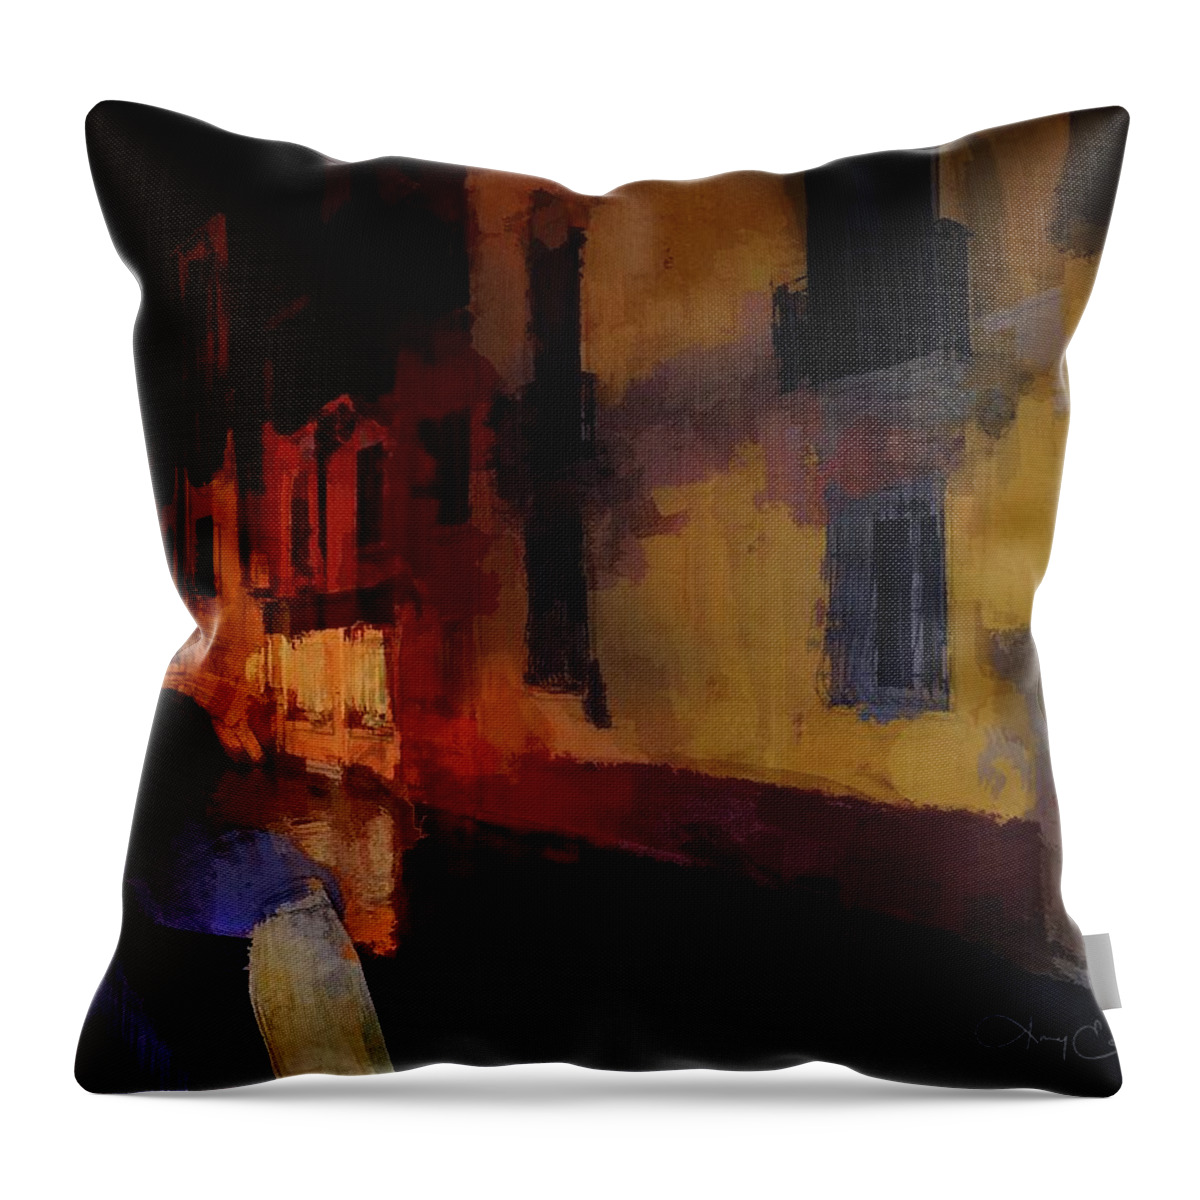 Venice Throw Pillow featuring the digital art Venice by Night by Looking Glass Images